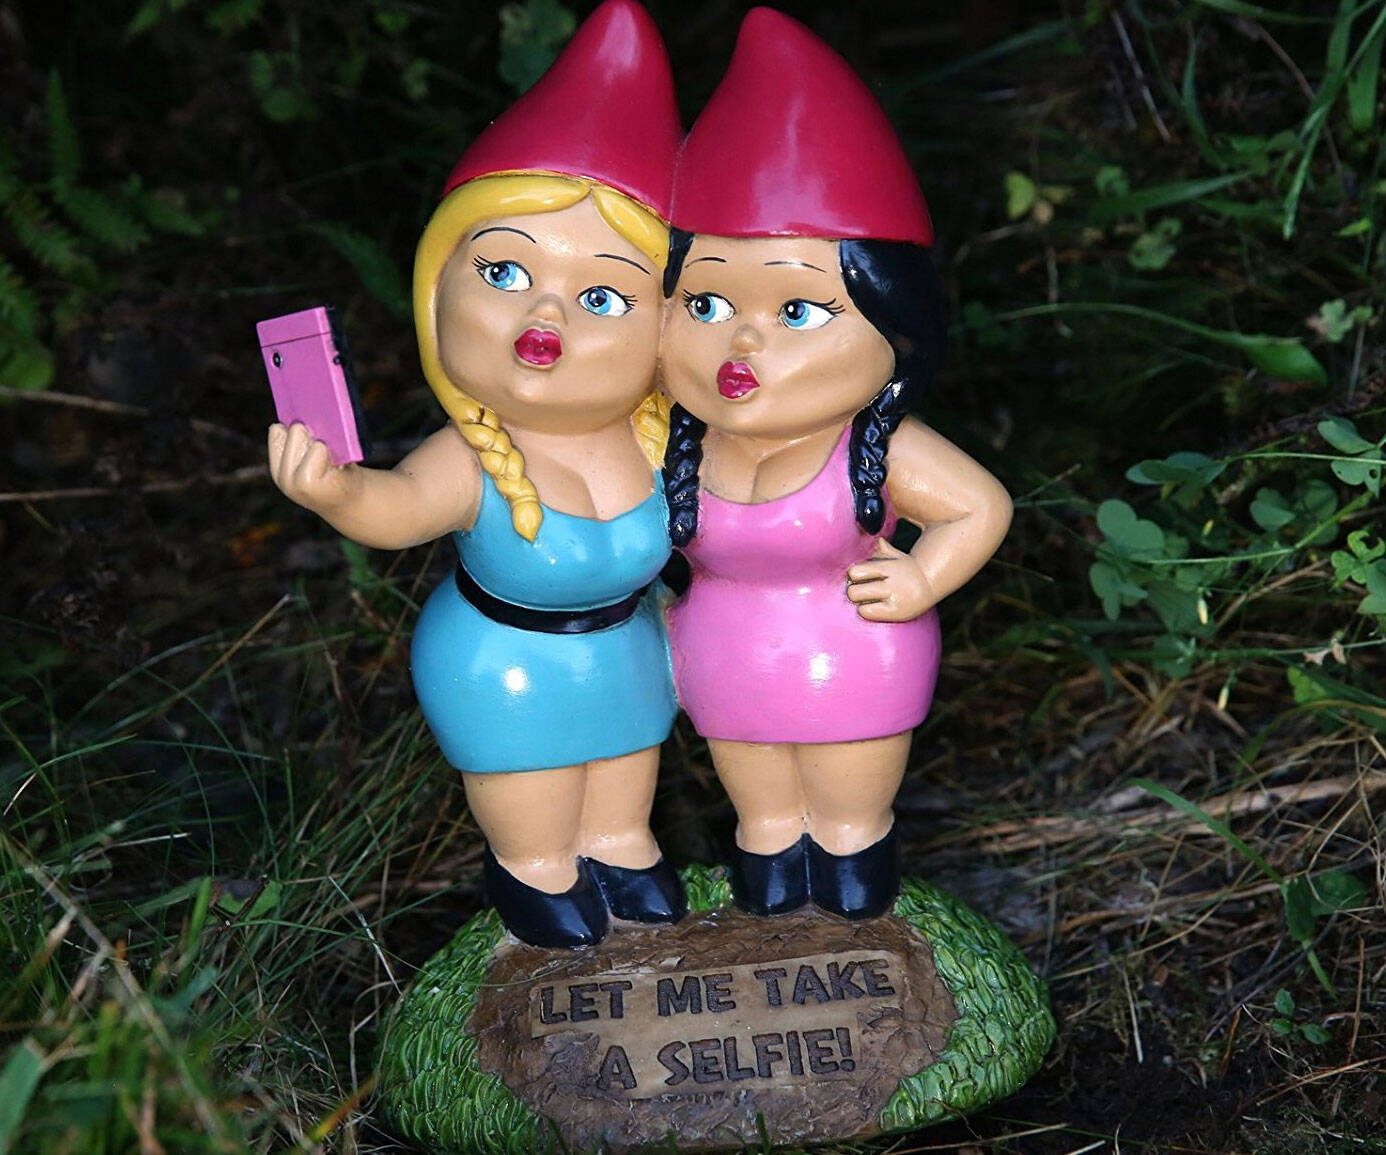 The Selfie Sisters Garden Gnome - http://coolthings.us